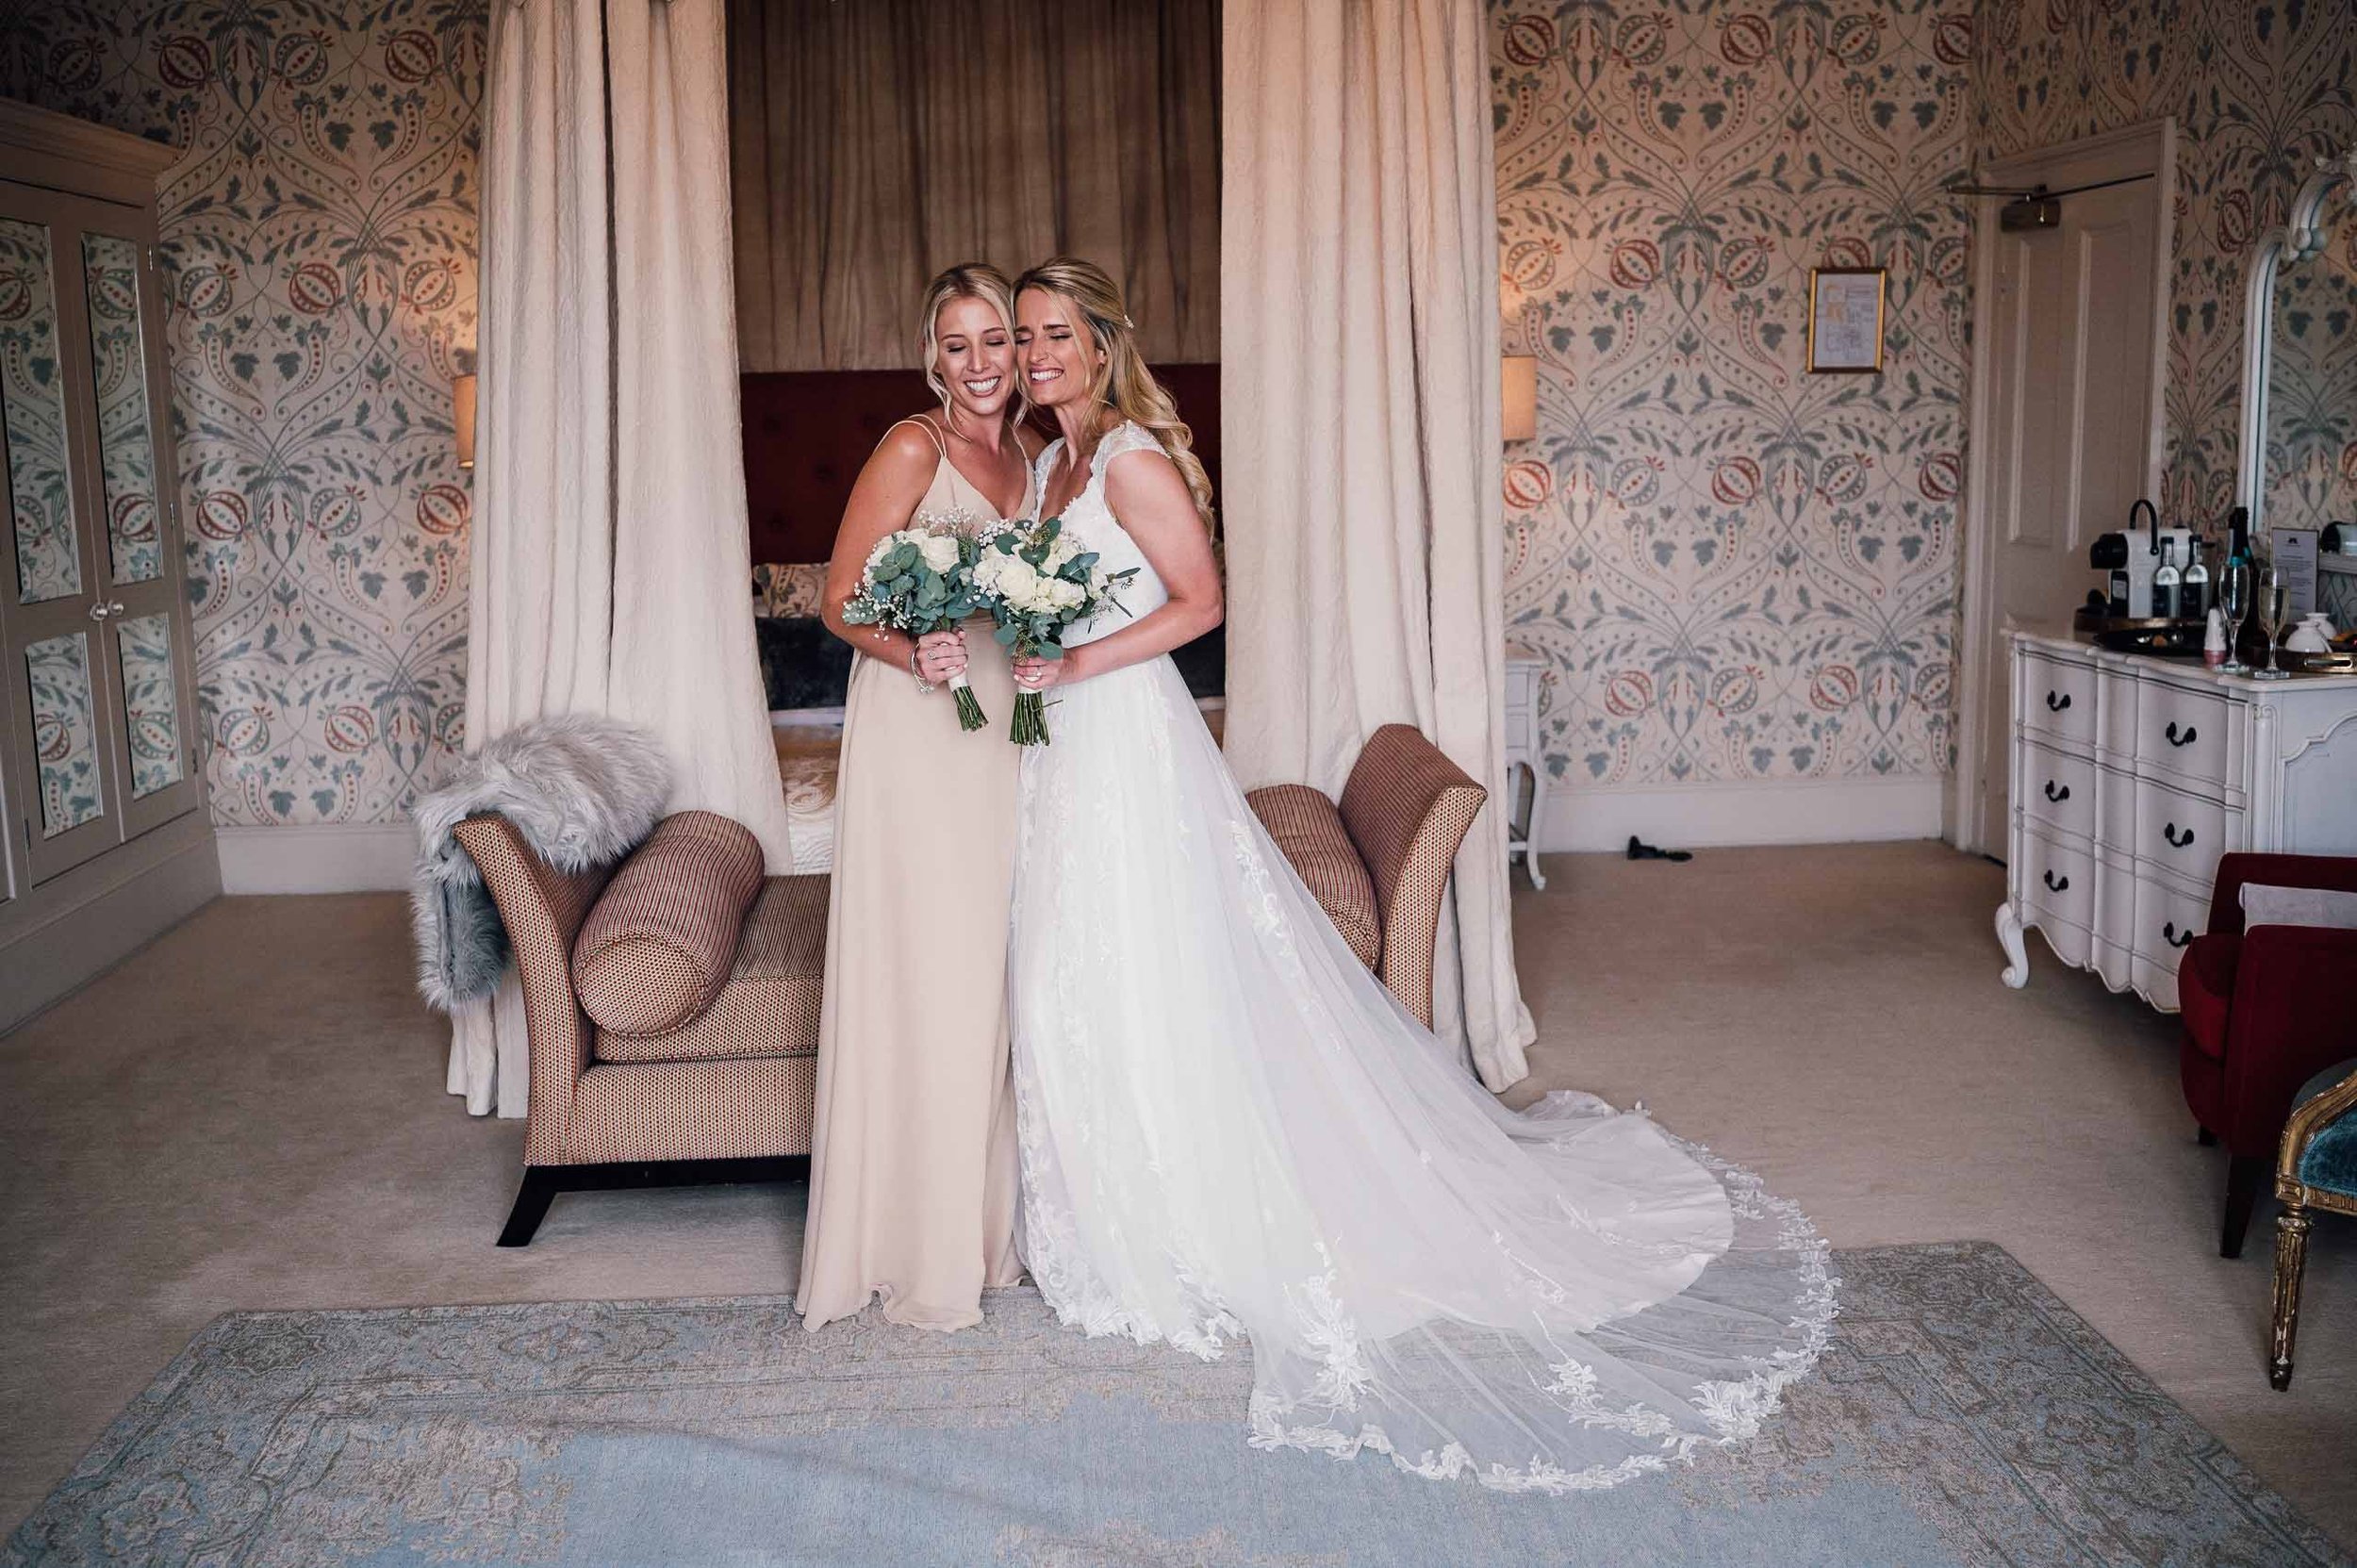 Bride and bridesmaid hugging in the bridal suite at Hodsock Priory